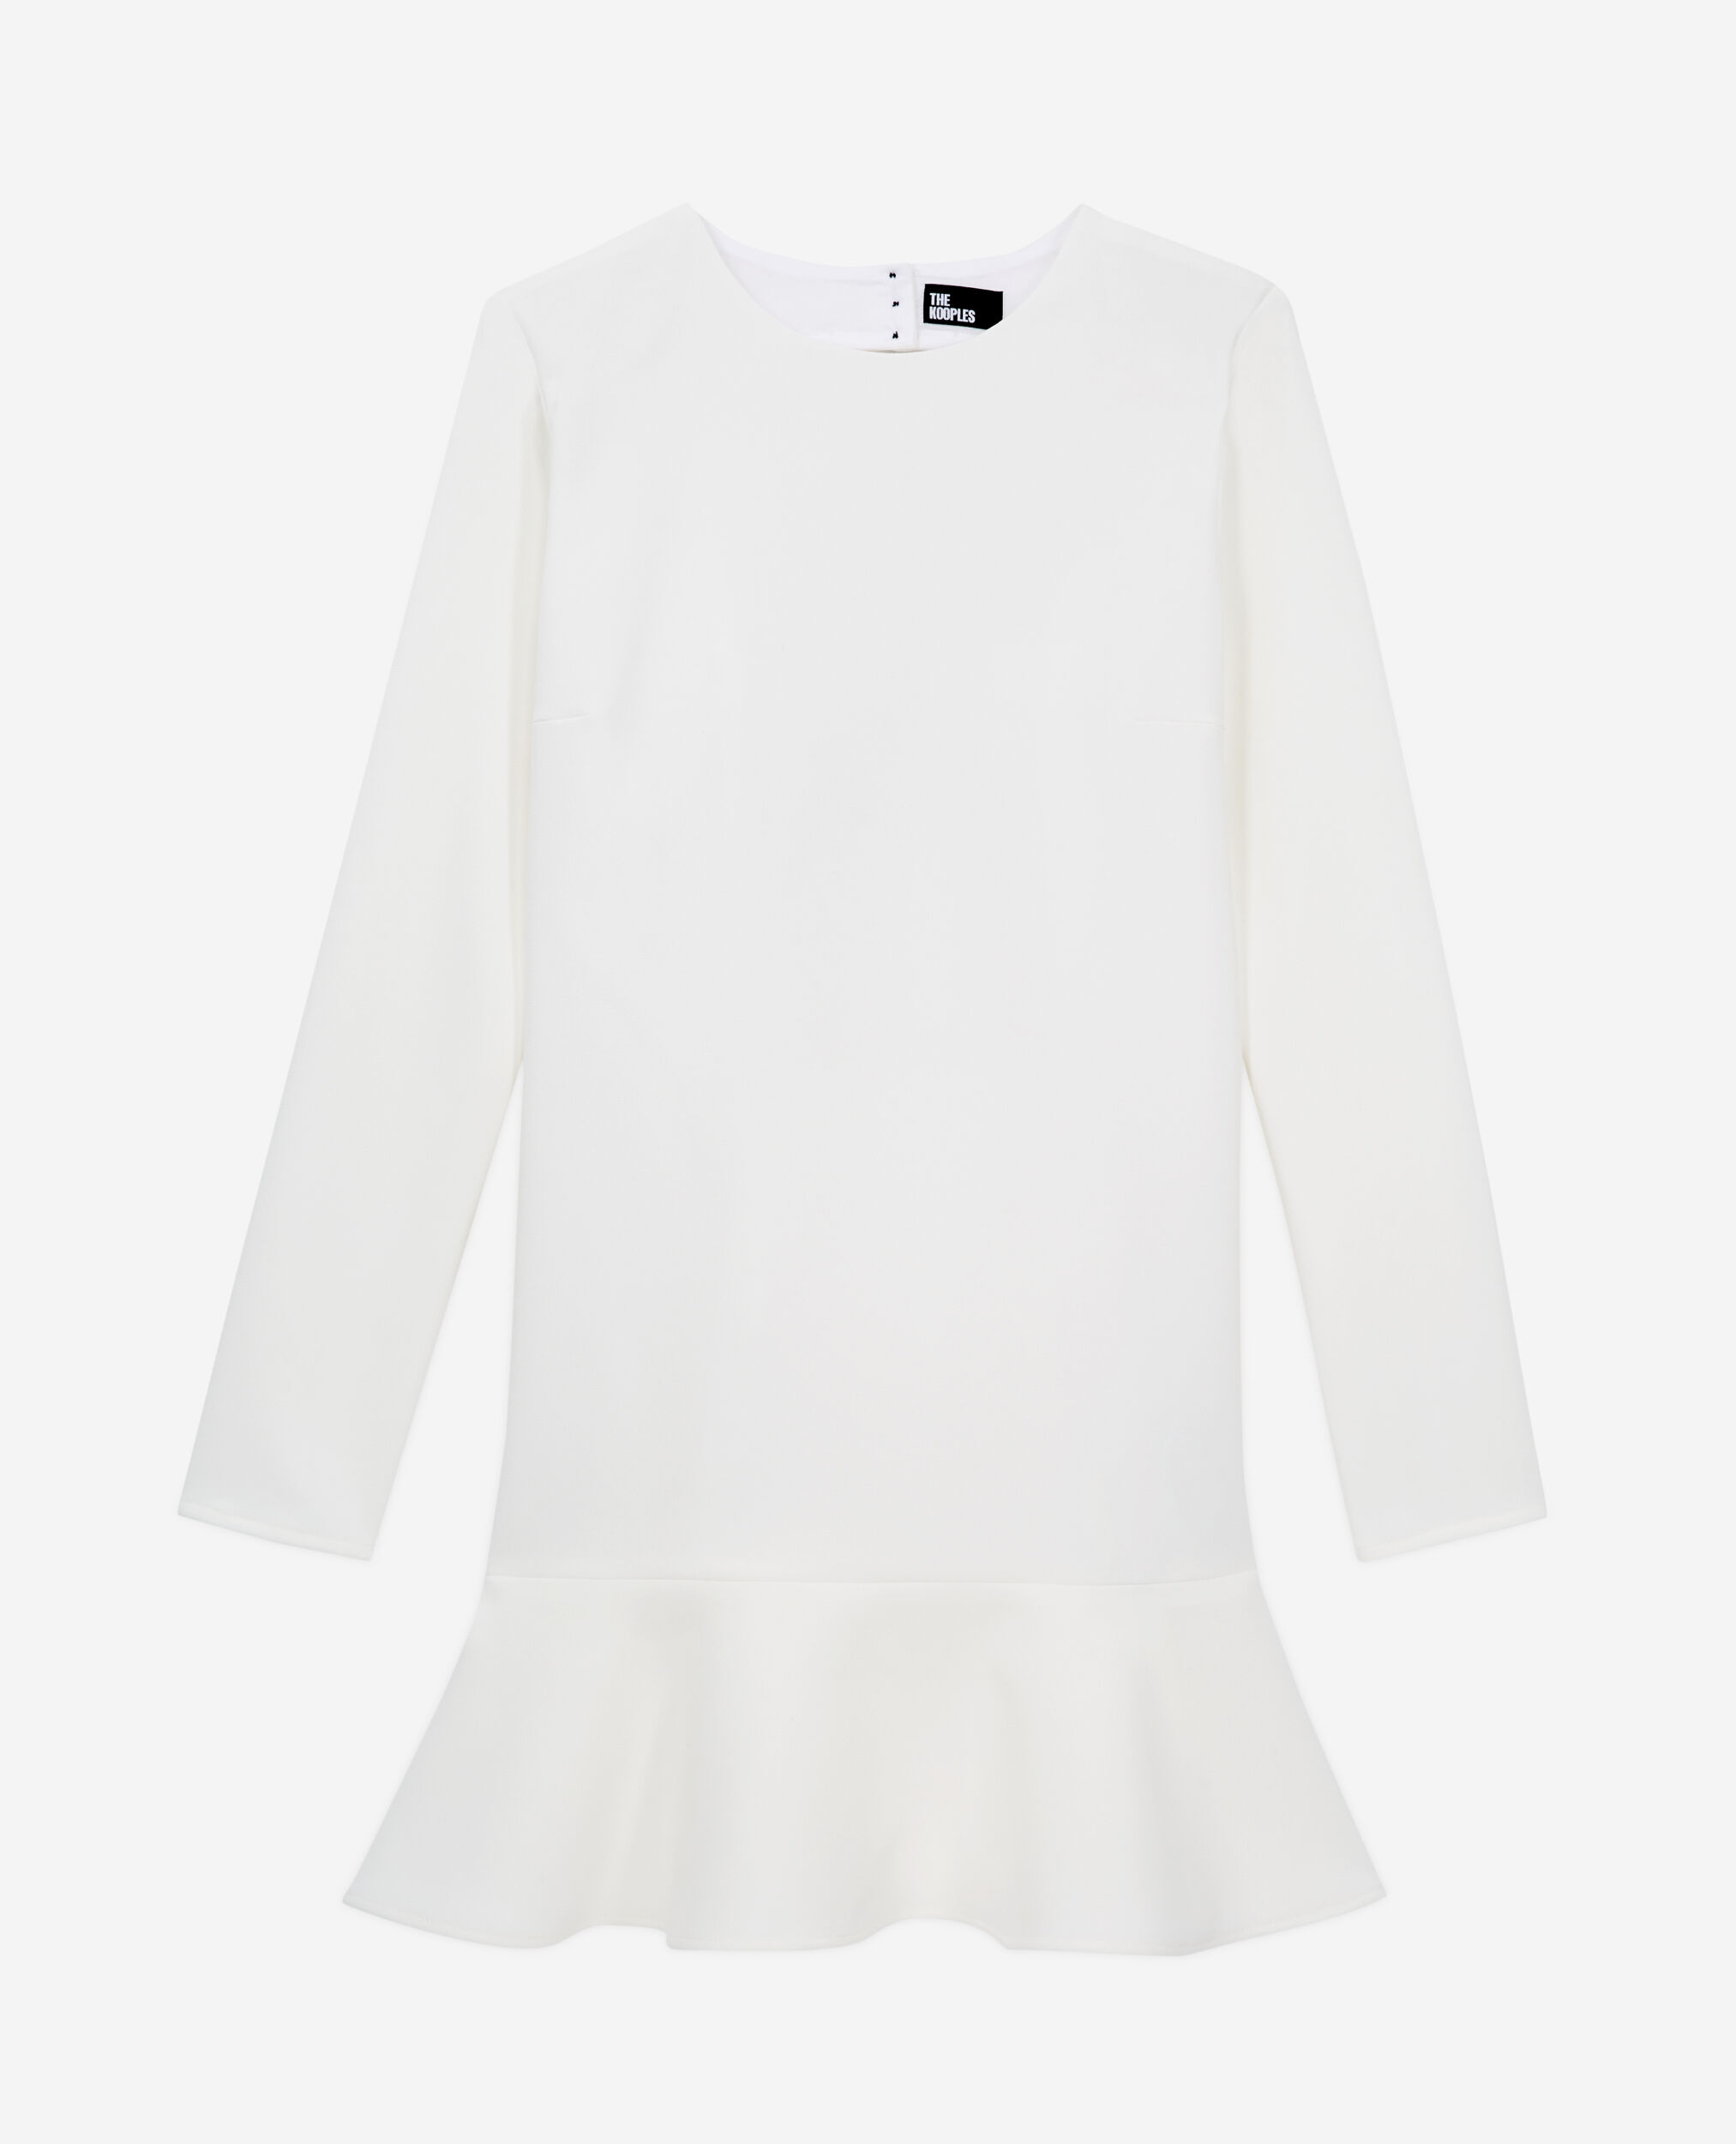 Robe courte blanche avec volant, WHITE, hi-res image number null